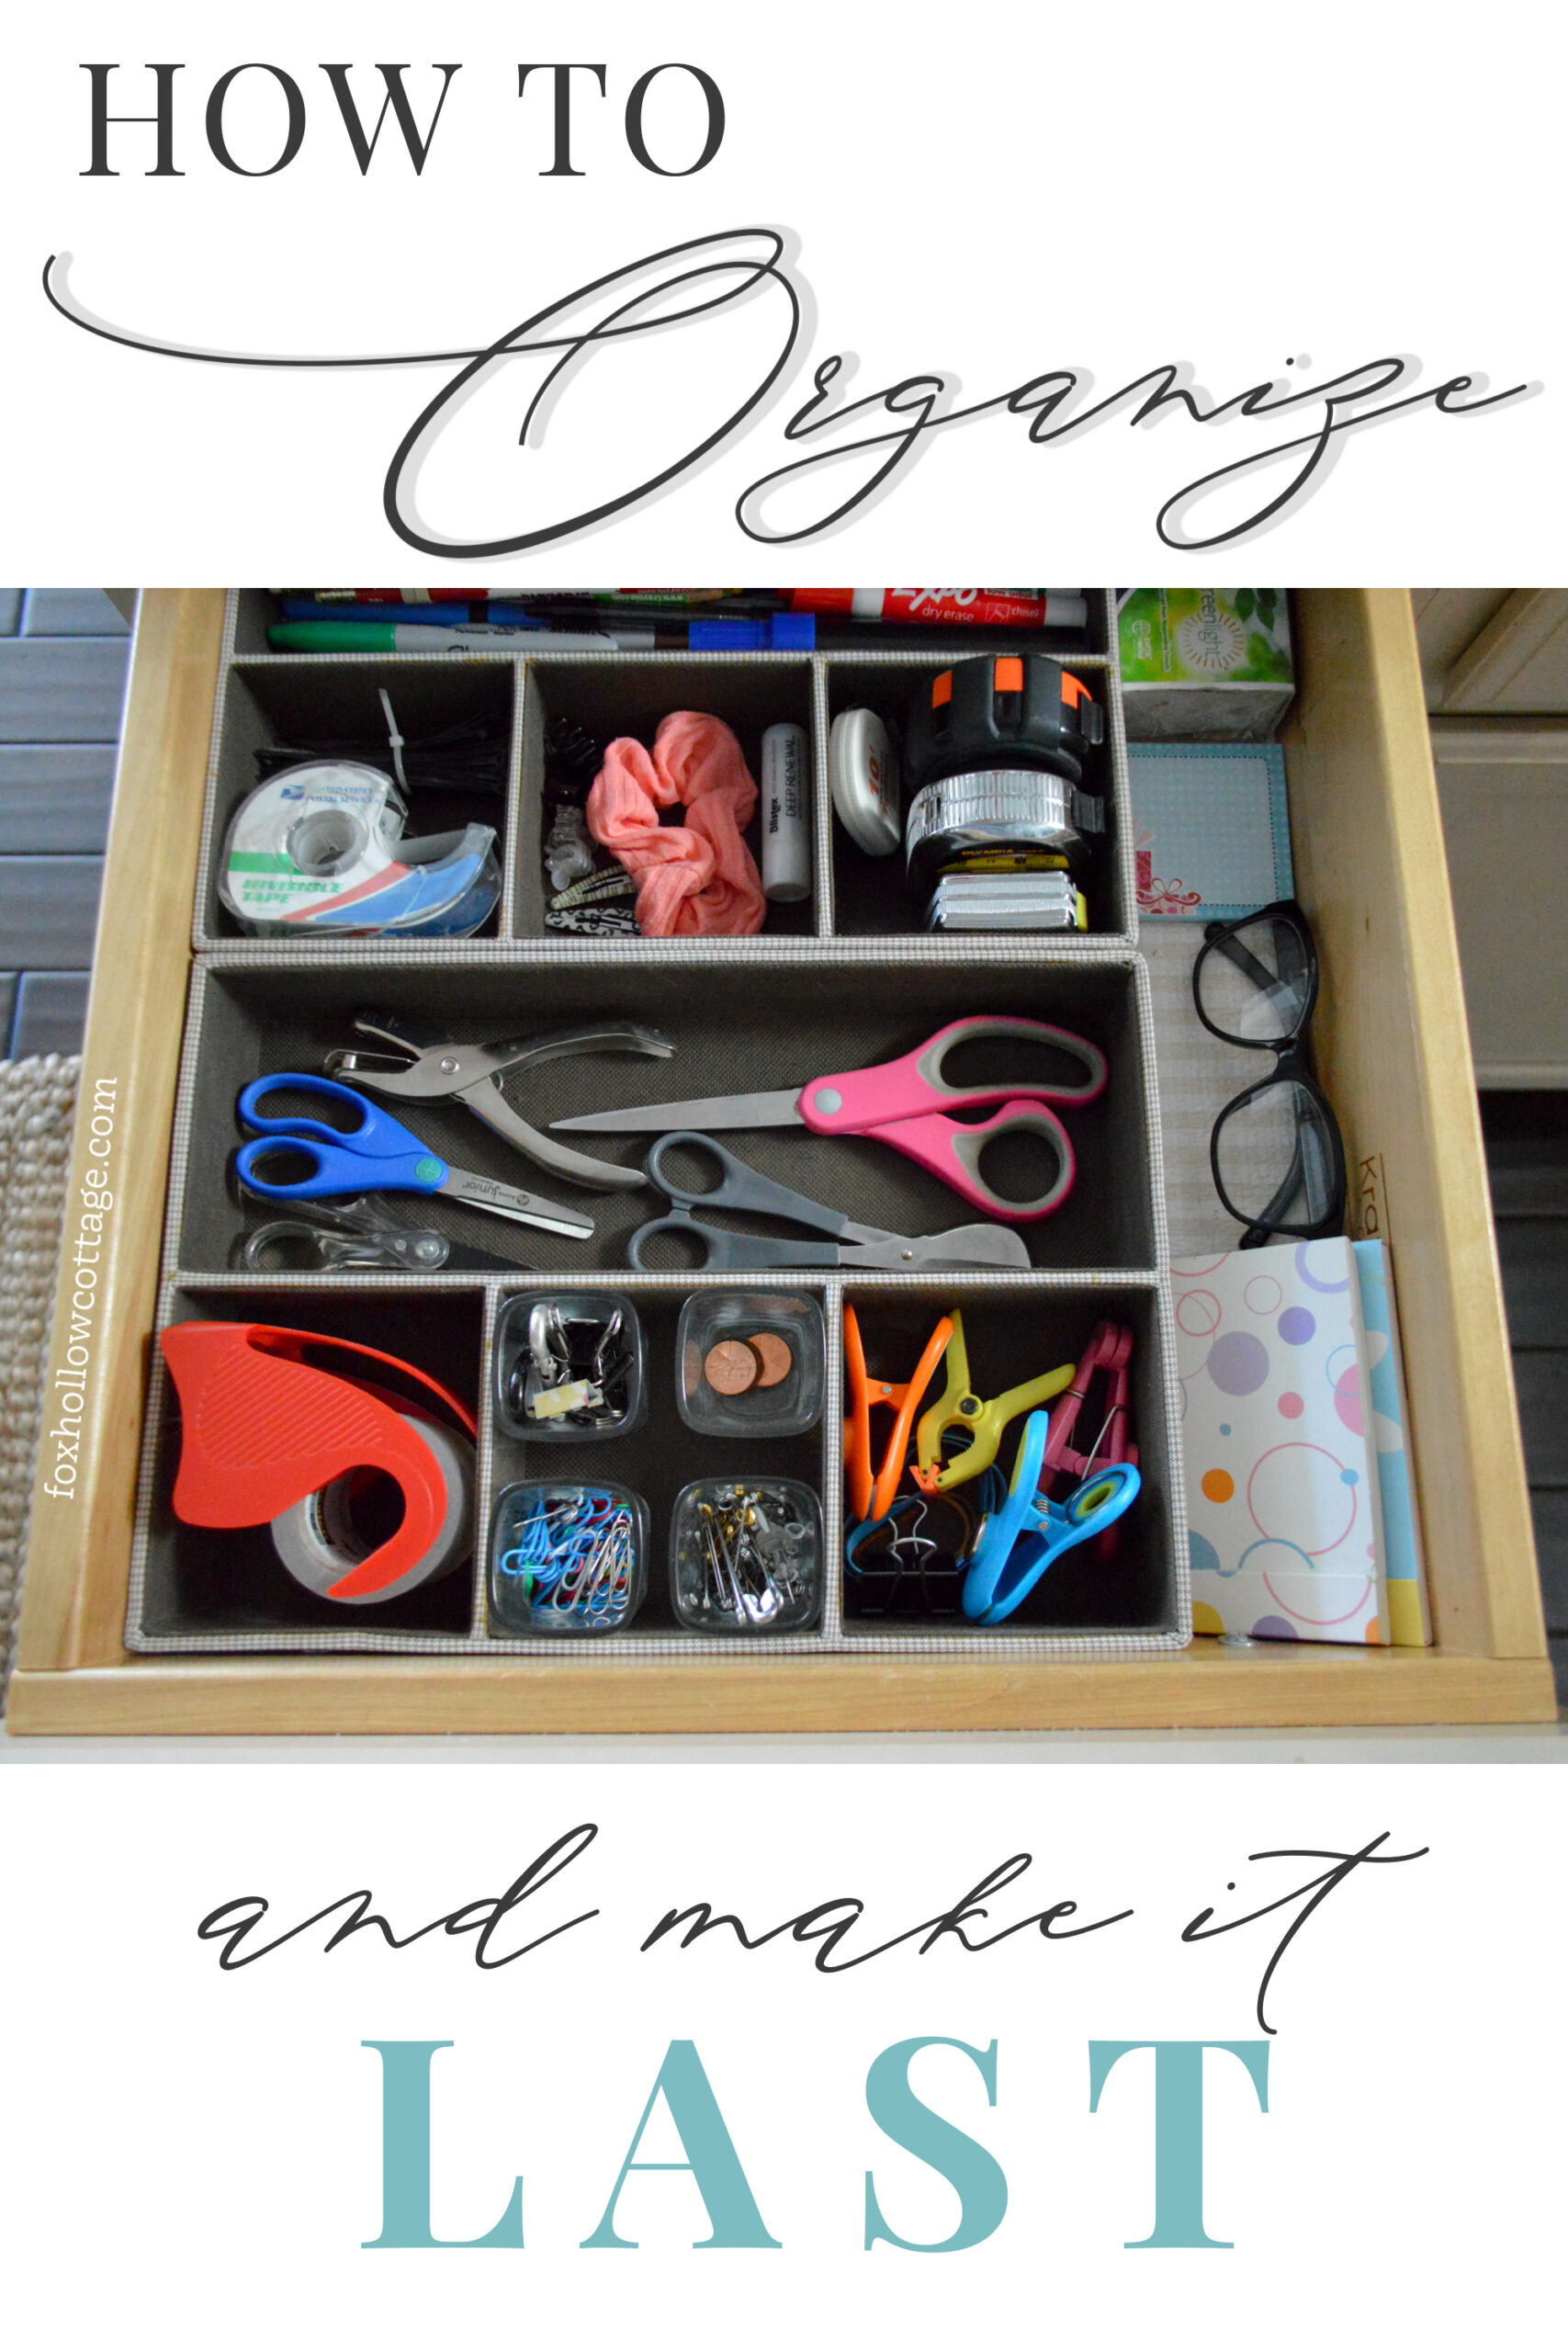 How To Organize A Junk Drawer And Miscellaneous Items - Fox Hollow Cottage